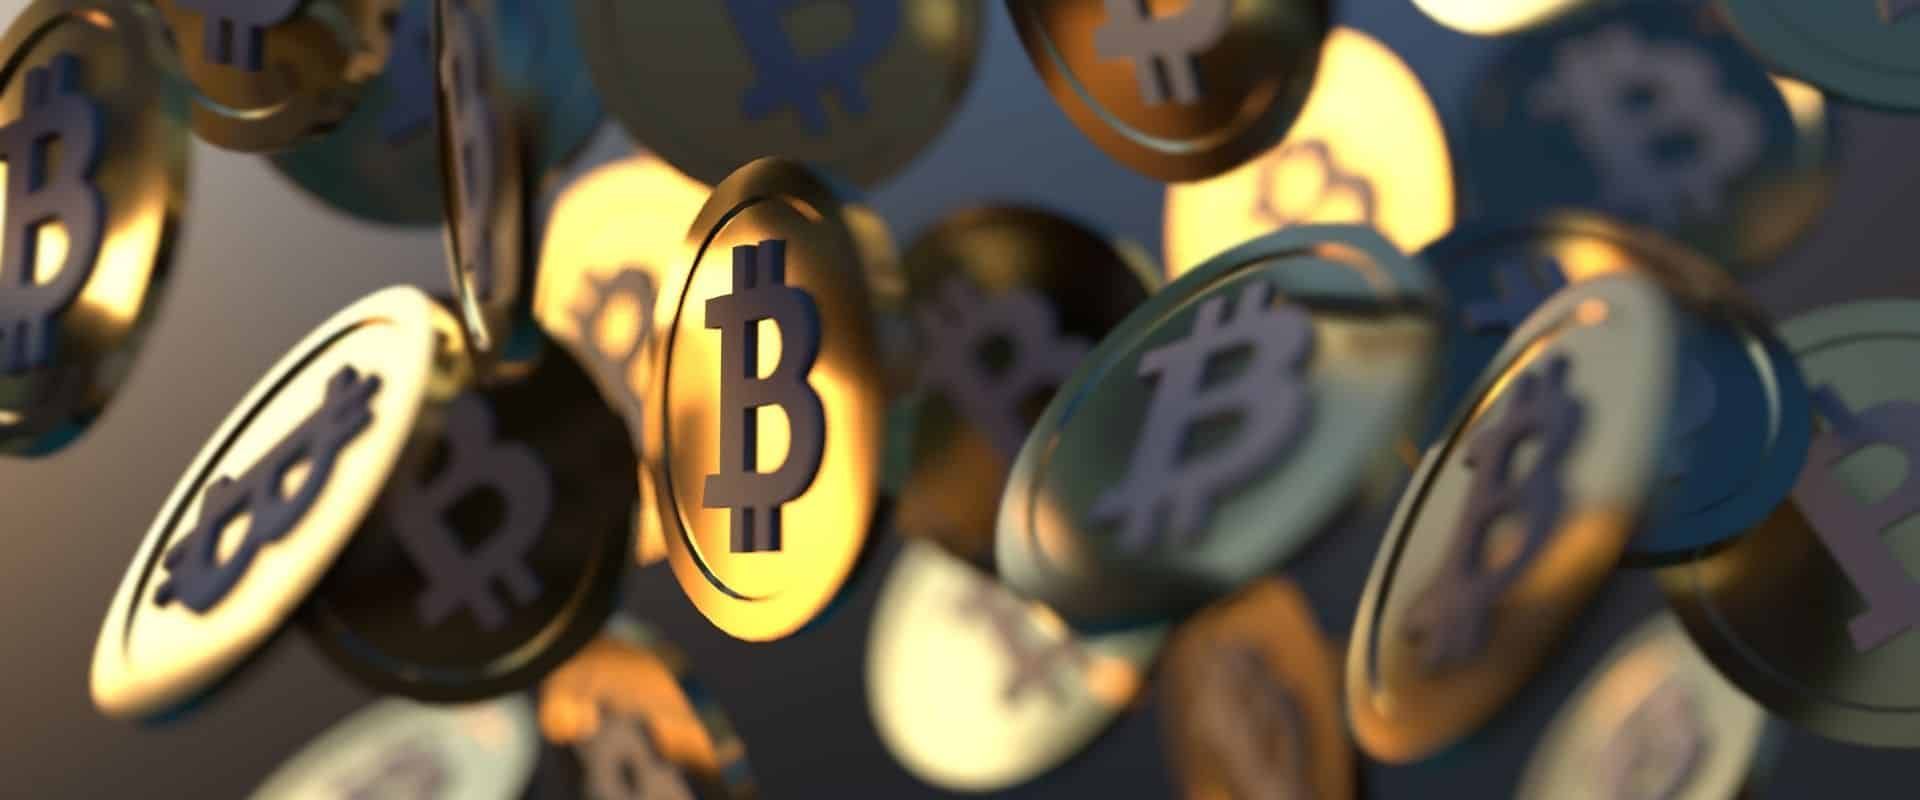 Buy a house with Bitcoins? A future possibility